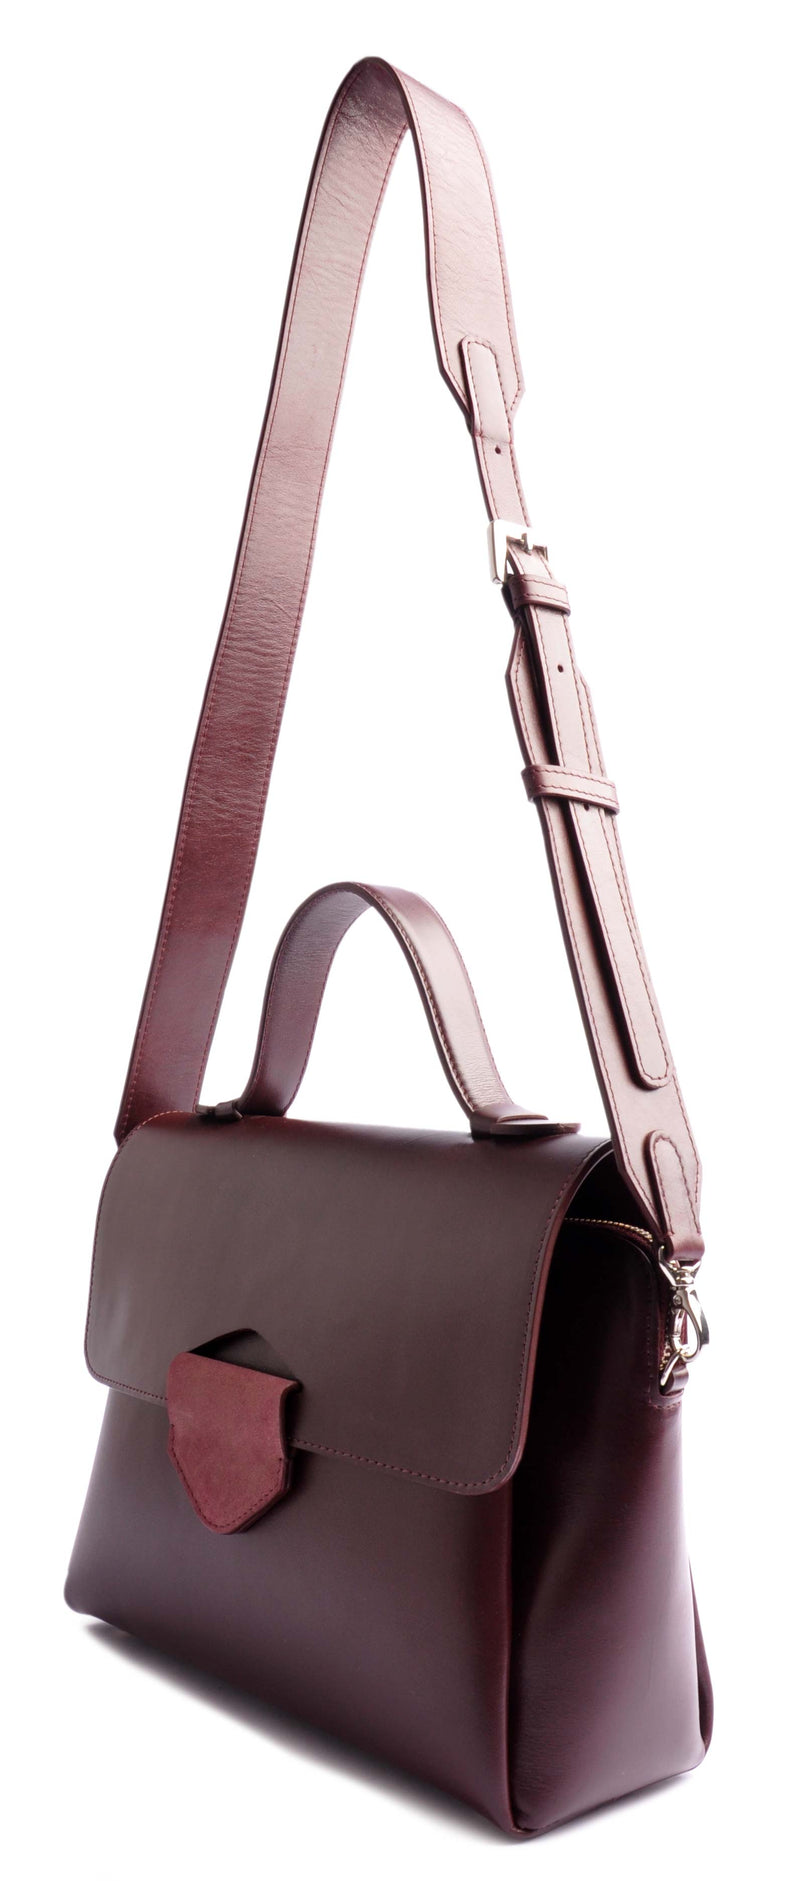 ARROW TOTE from OSTWALD Bags . ARROW Tote Bag with an adjustable statement strap